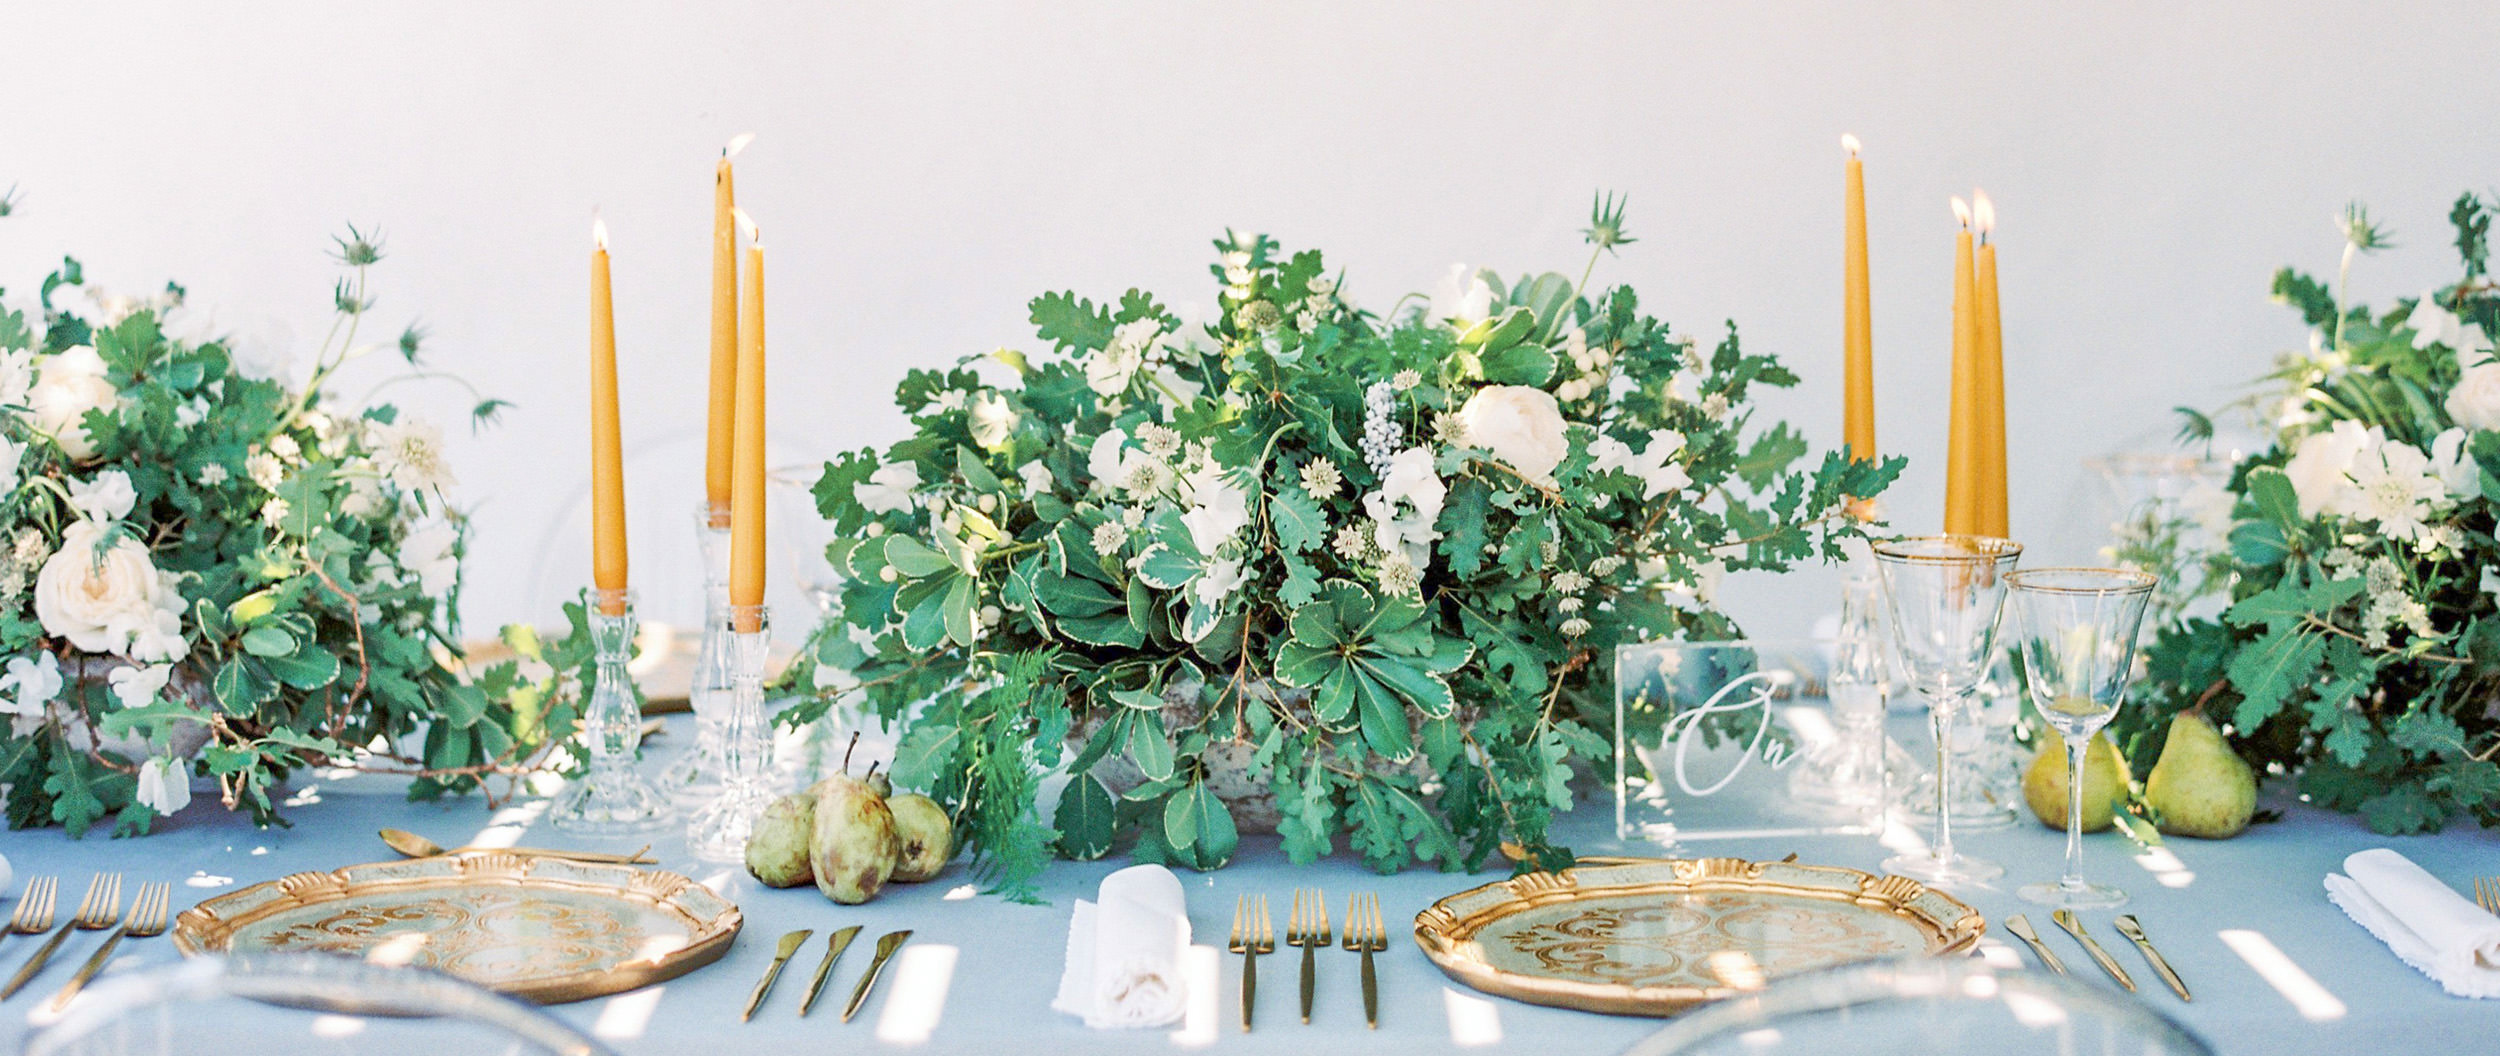 Romantic wedding reception decor in blue and gold for wedding in Greece copy